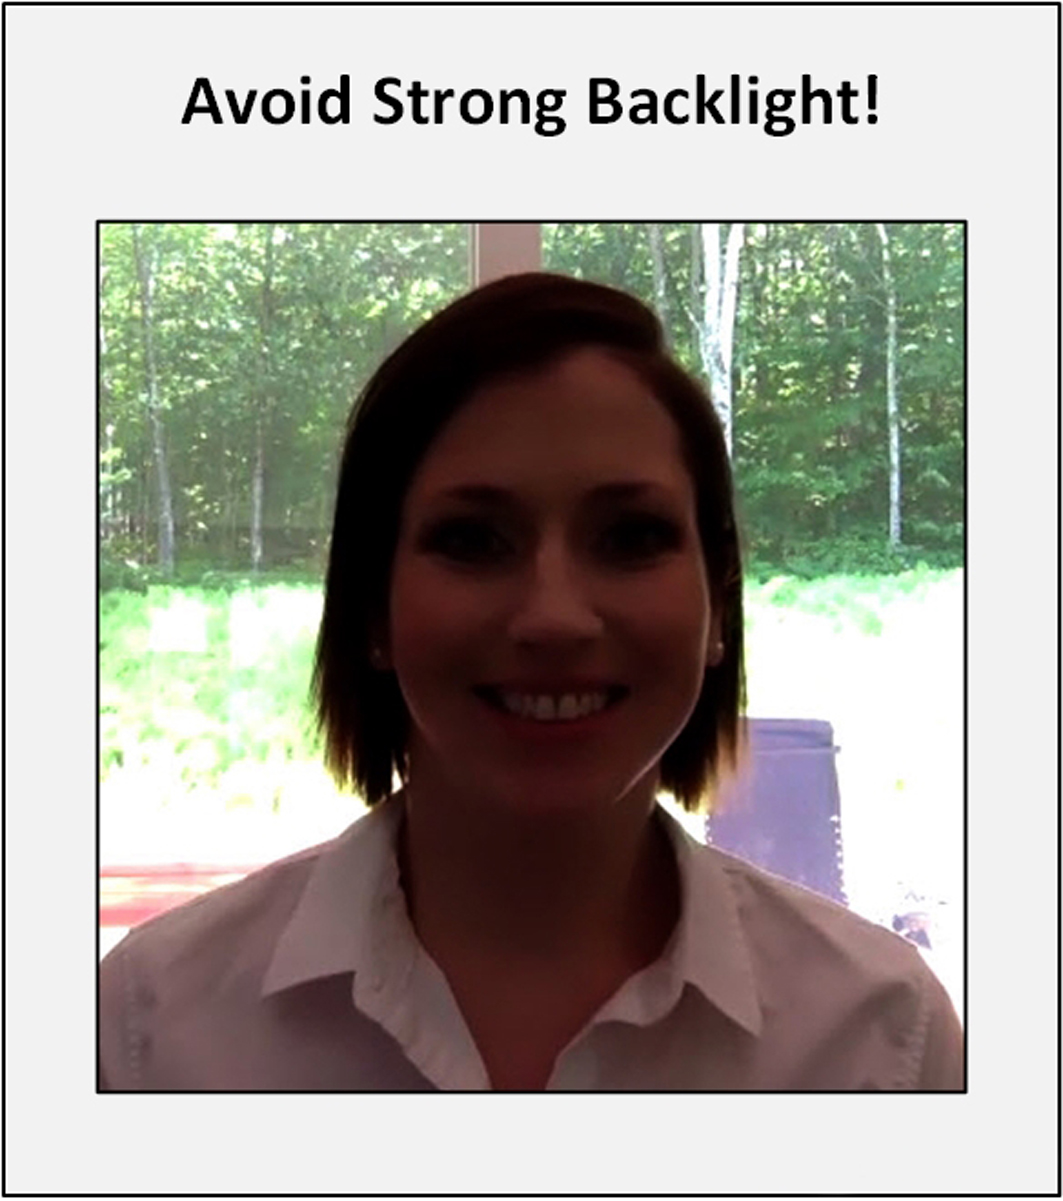 Image demonstrating how strong backlight makes face too dark to be seen.